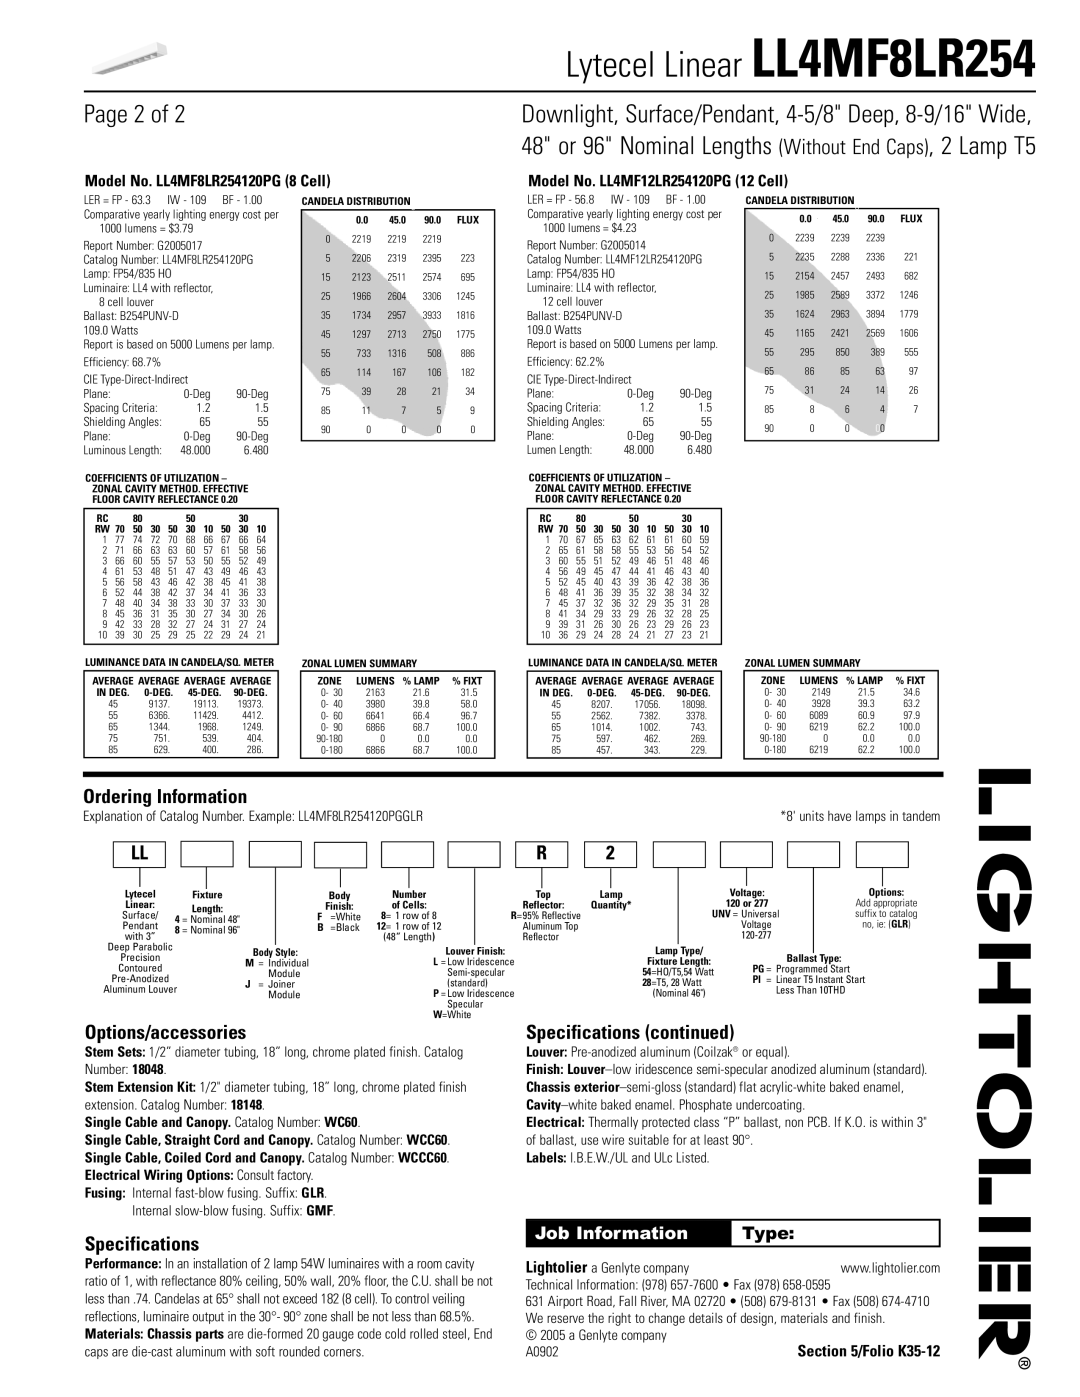 Lightolier LL4MF8LR254 Page 2 of, Ordering Information, Options/accessories, Specifications continued, Job Information 